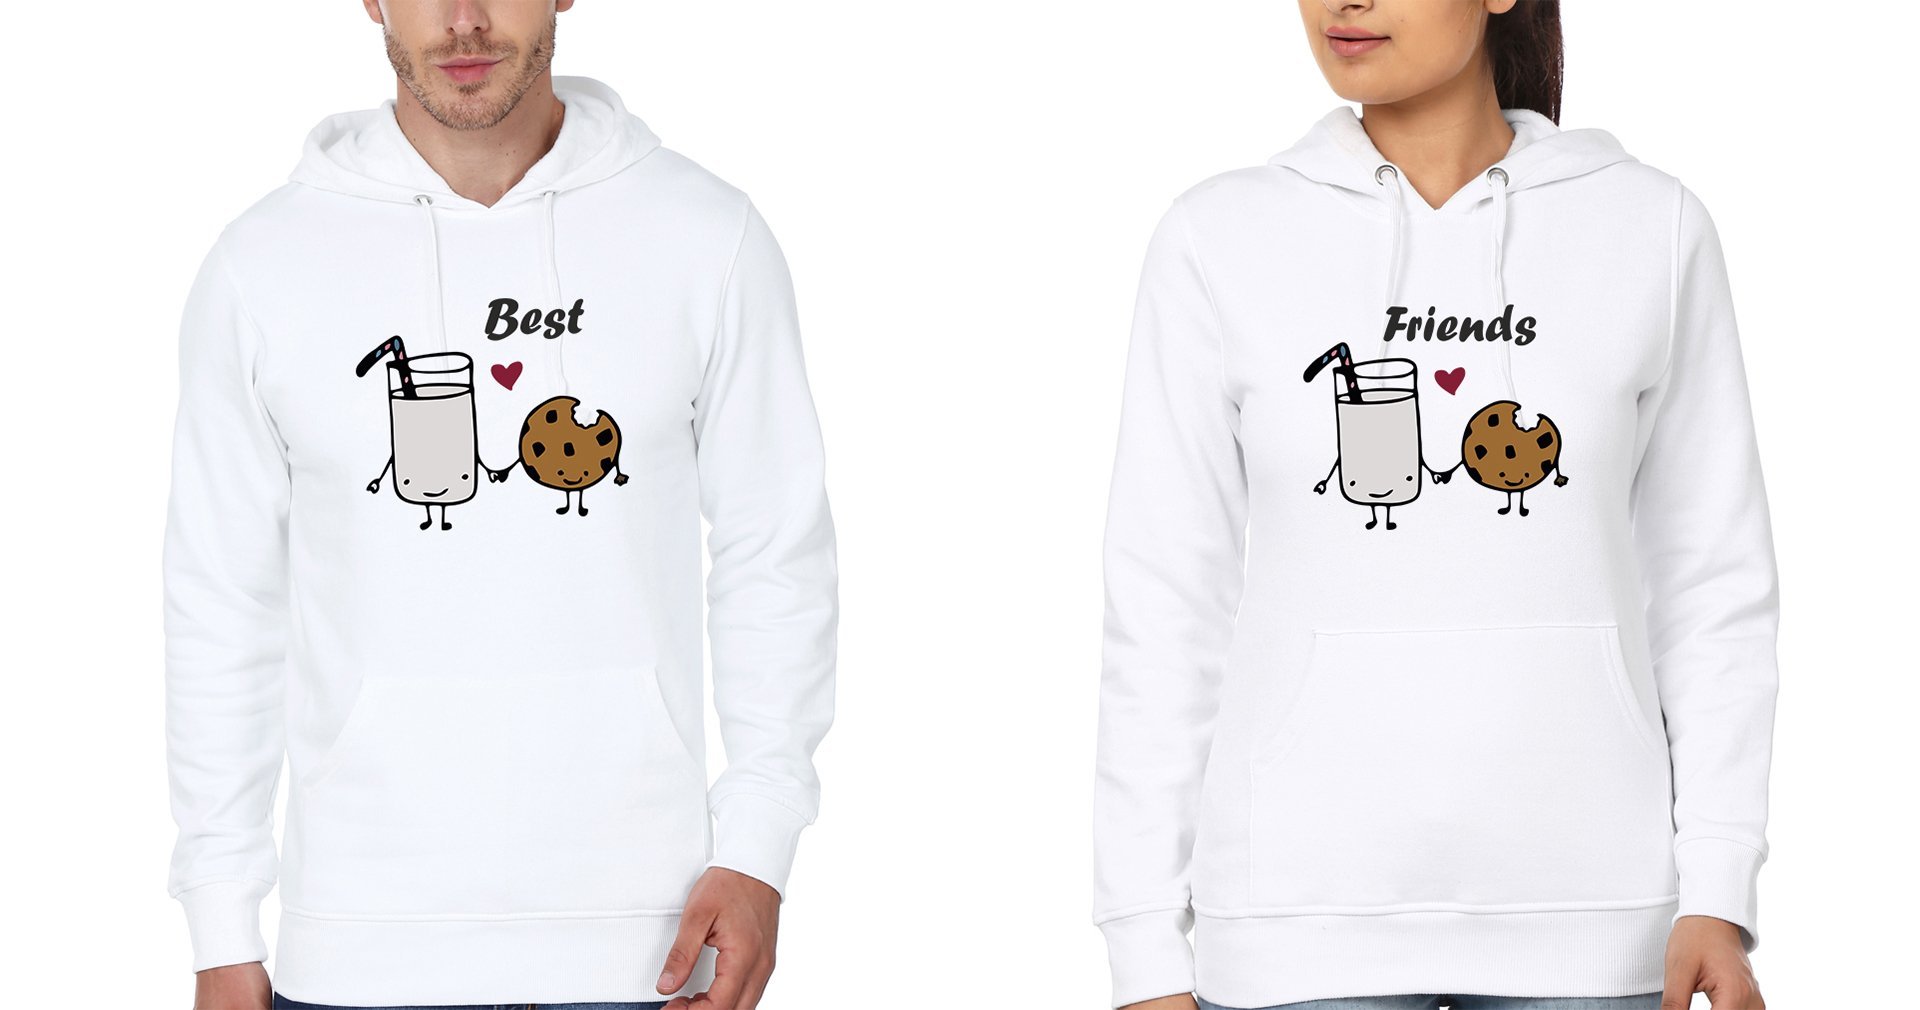 Best Friend BFF Hoodies-FunkyTradition - FunkyTradition